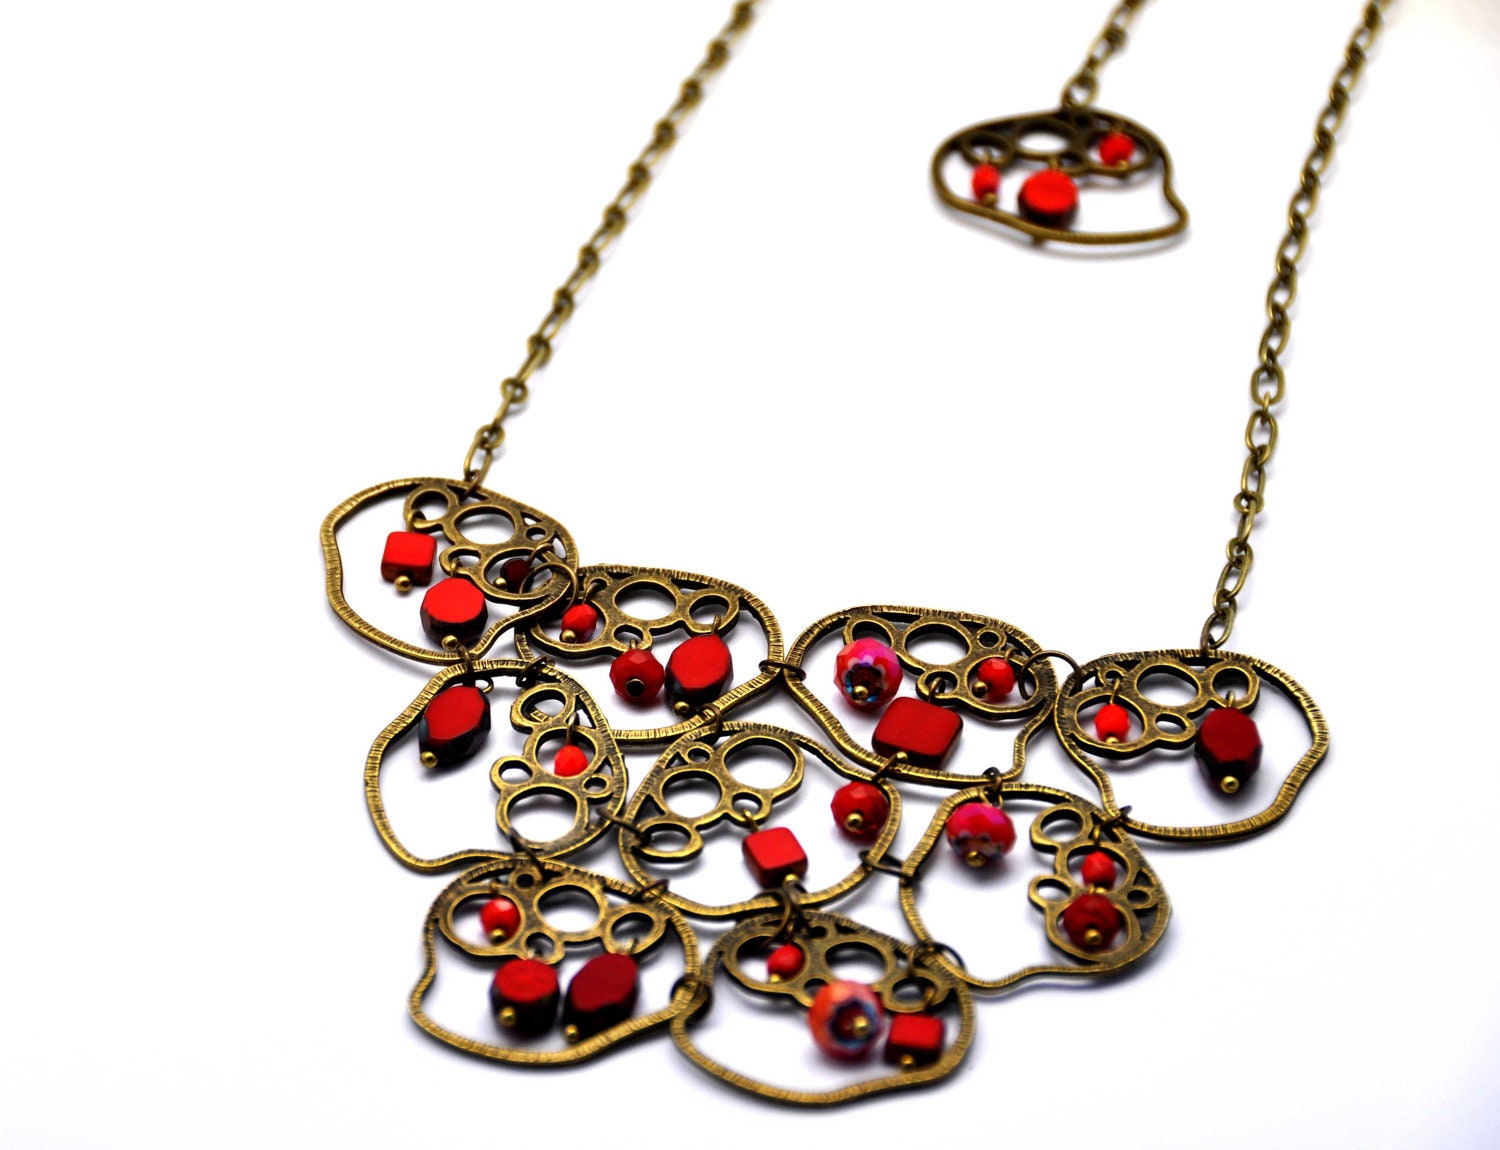 Cranberry delights, necklace made with red czech glass beads, Picasso, opaque, faceted crystals and antiqued brass irregular shapes - BBTAR